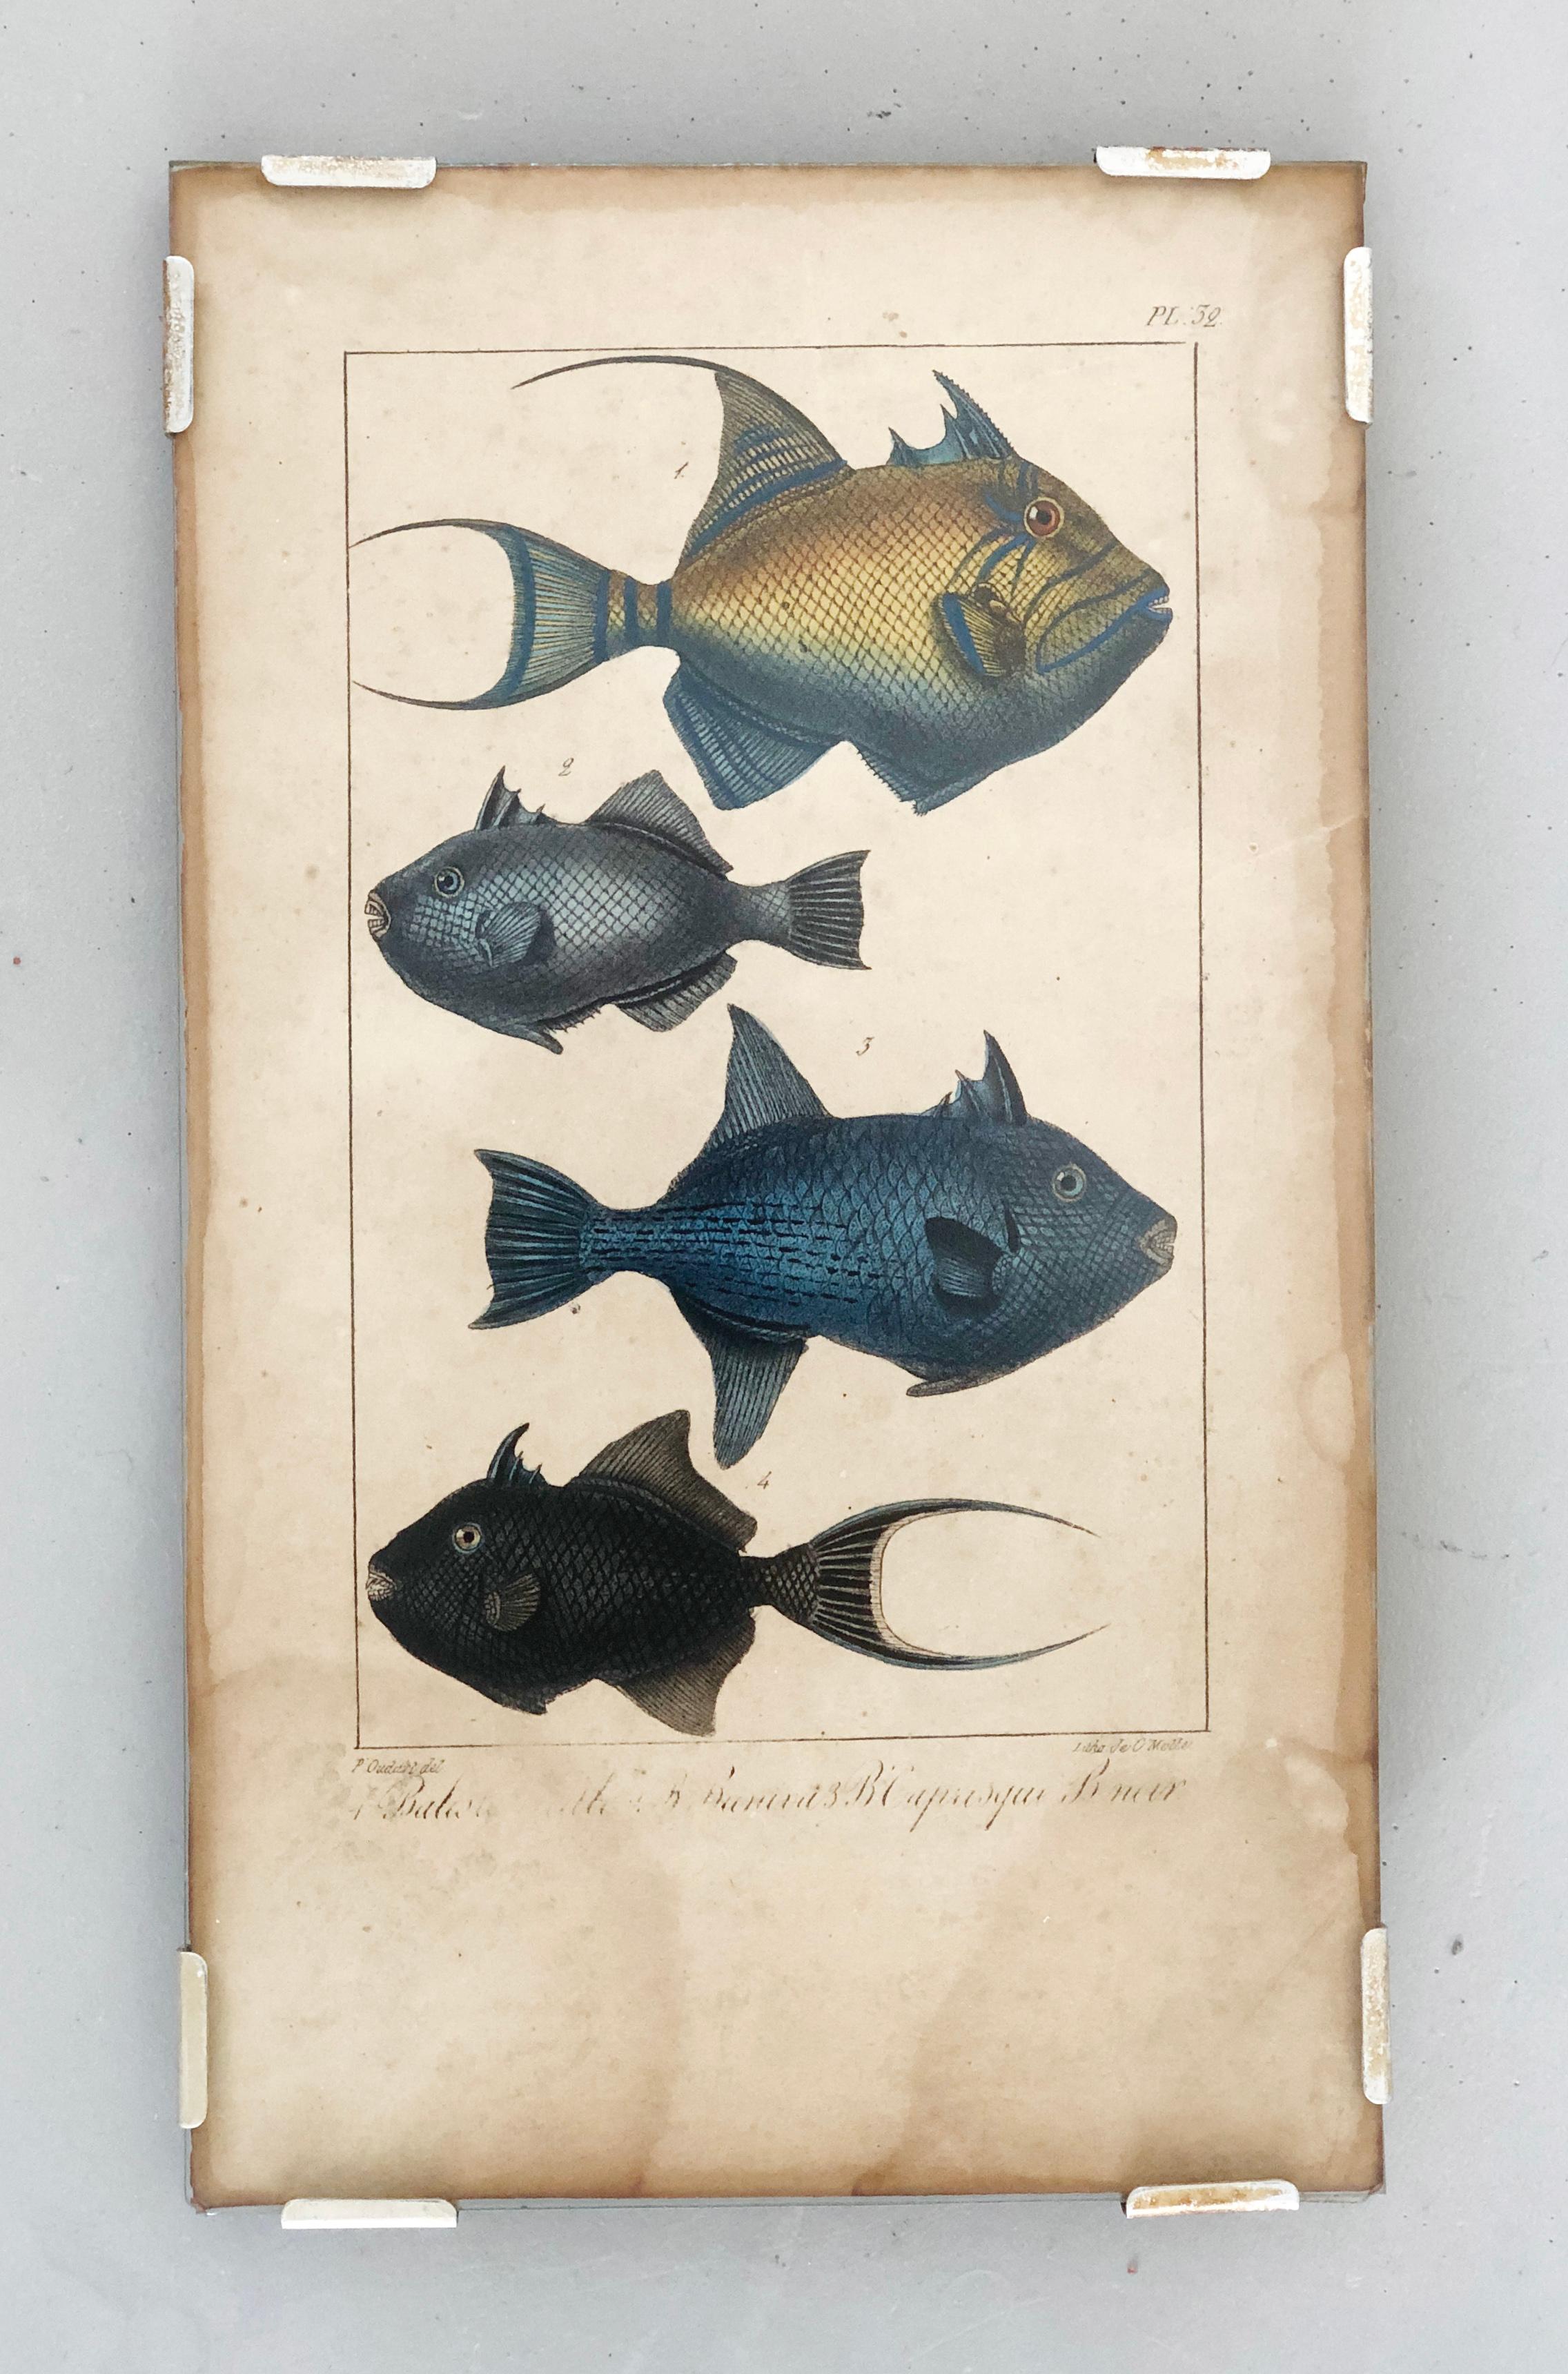 Naturaly history lithograph, 4 tropical fish - Plate 32 - P. Oudart & C. Motte.
In style of Maria Sibylla Merian

This is a hand-colored lithograph depicting 